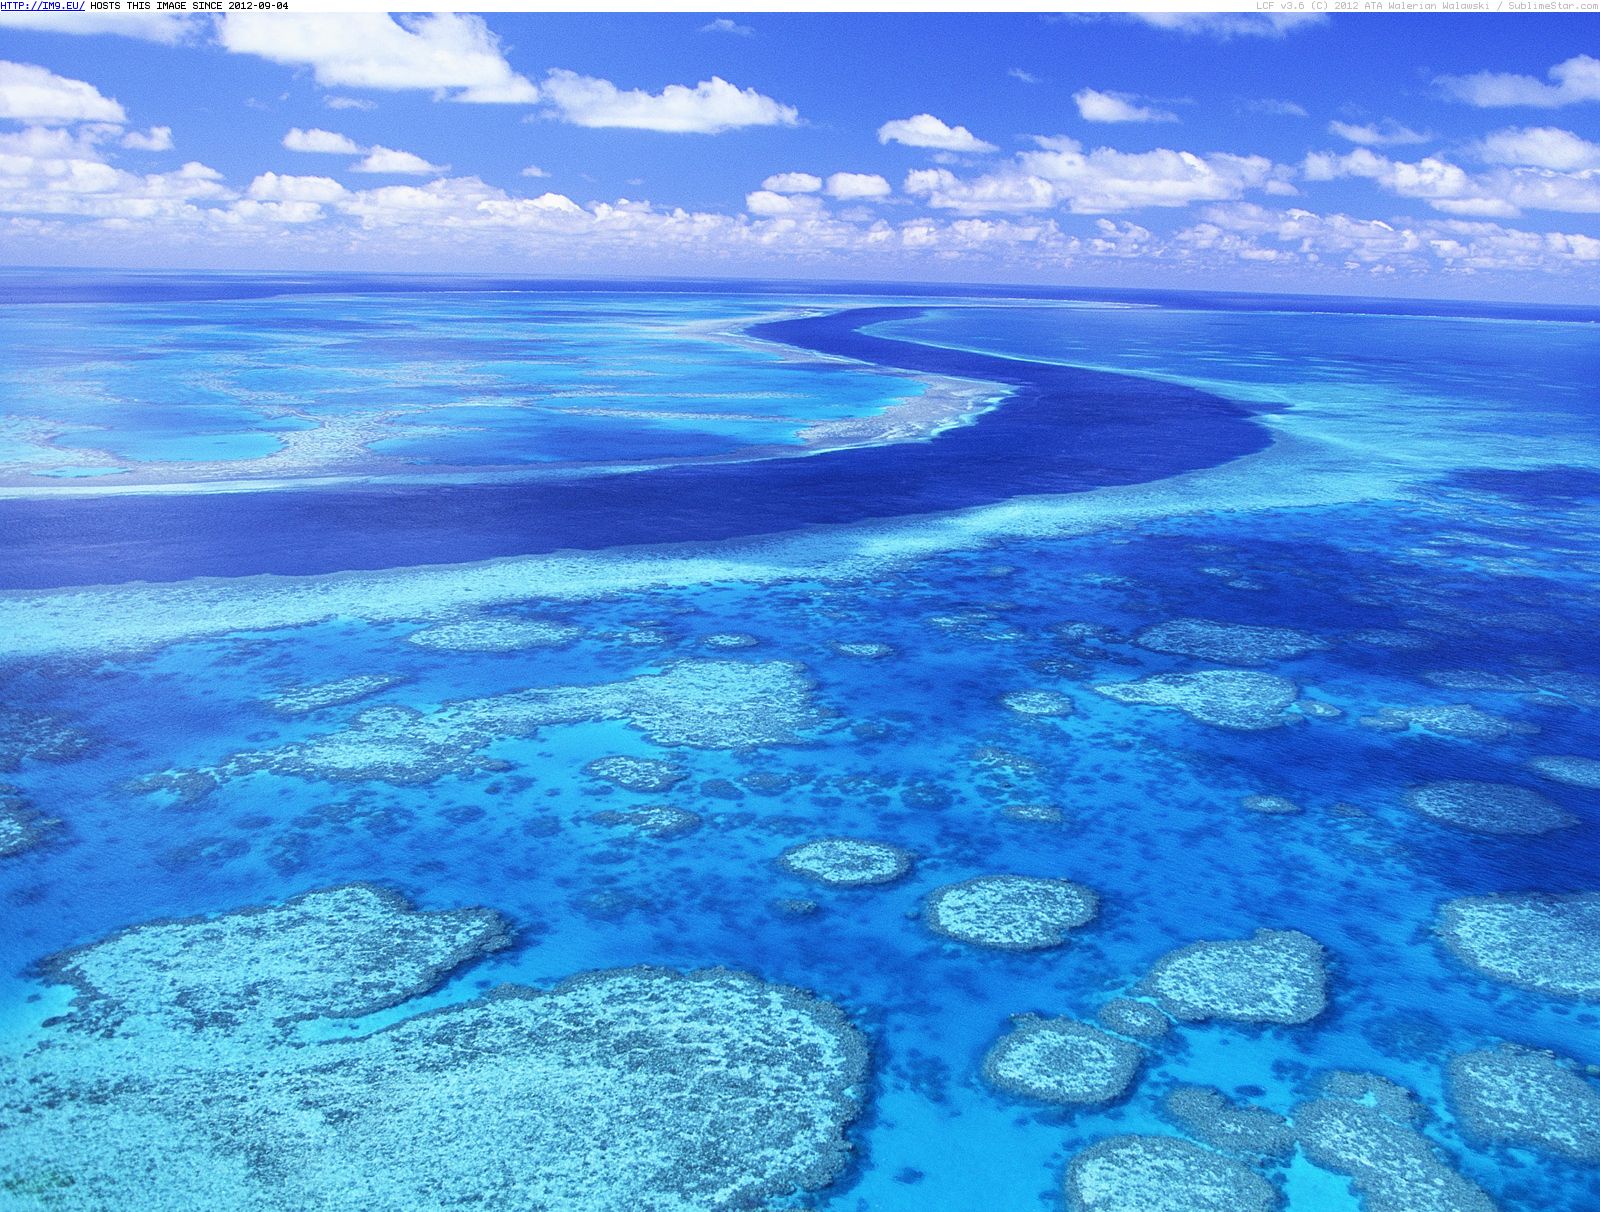 Aerial View of the Great Barrier Reef, Australia (in Beautiful photos and wallpapers)